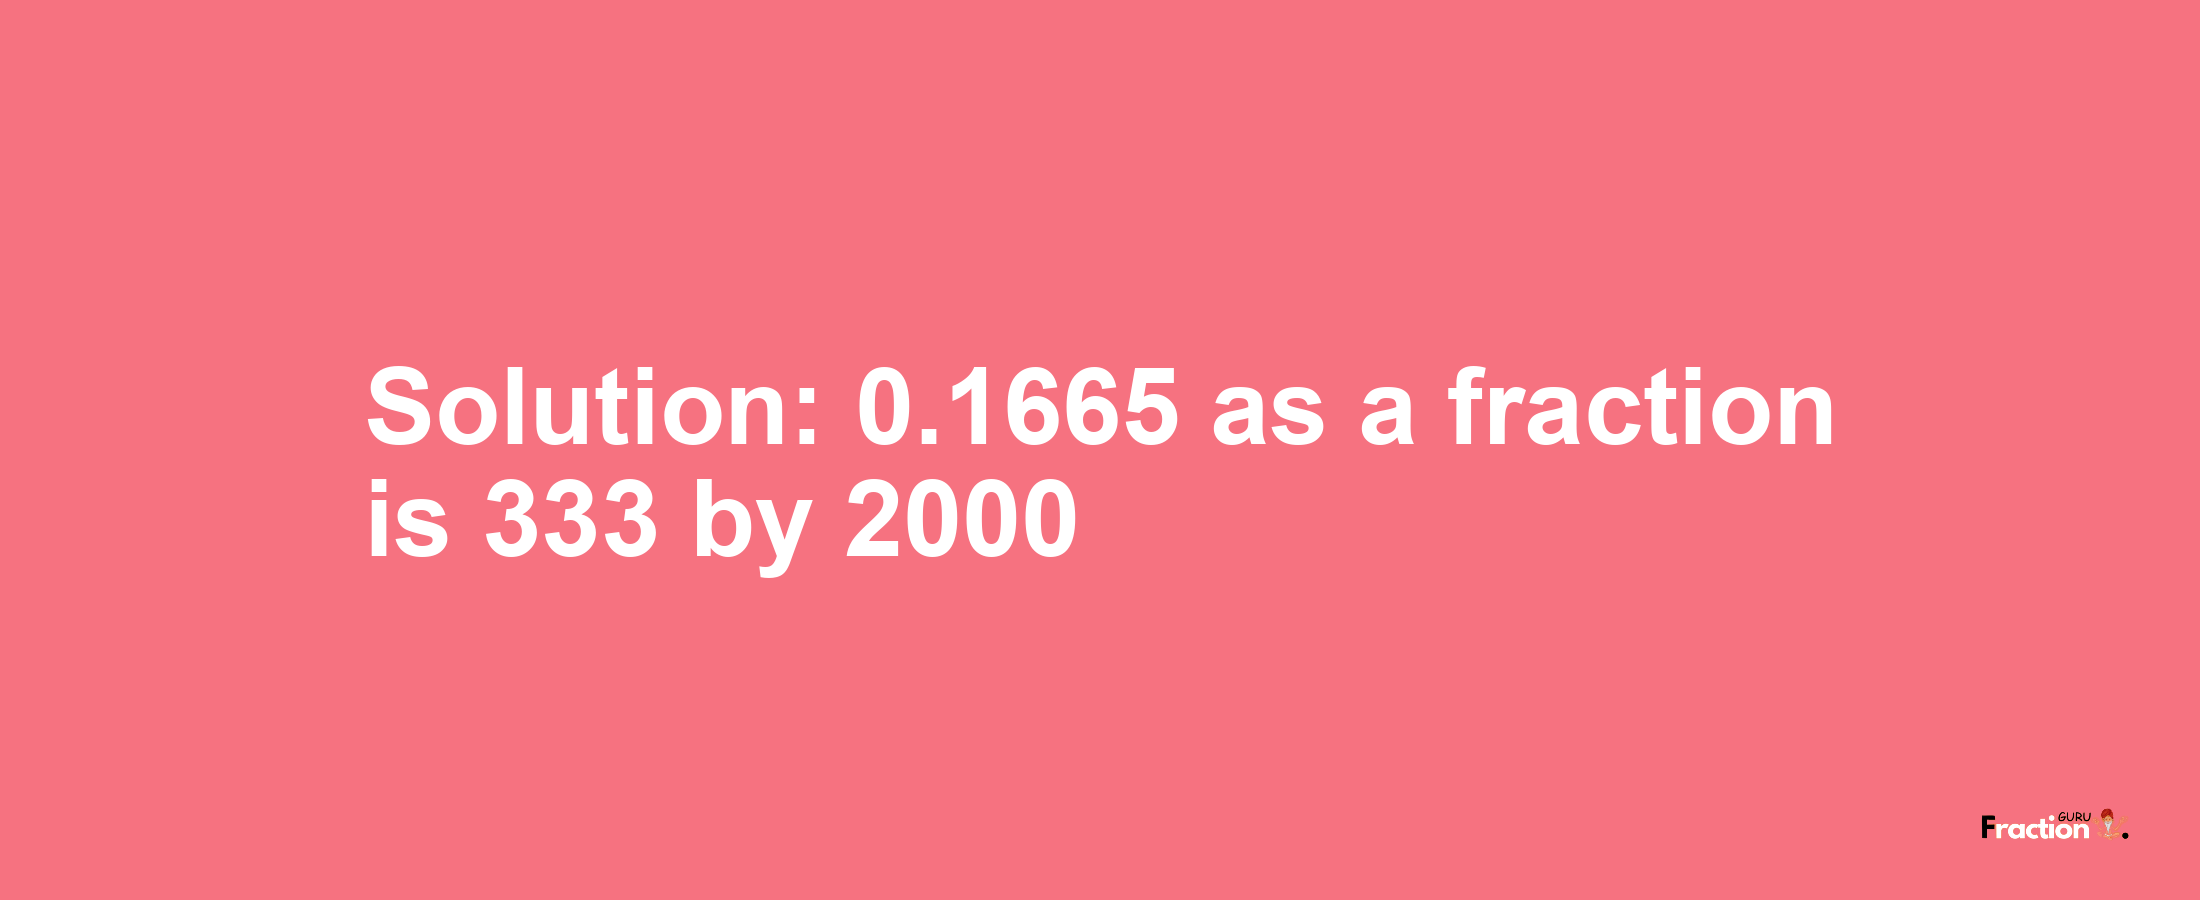 Solution:0.1665 as a fraction is 333/2000